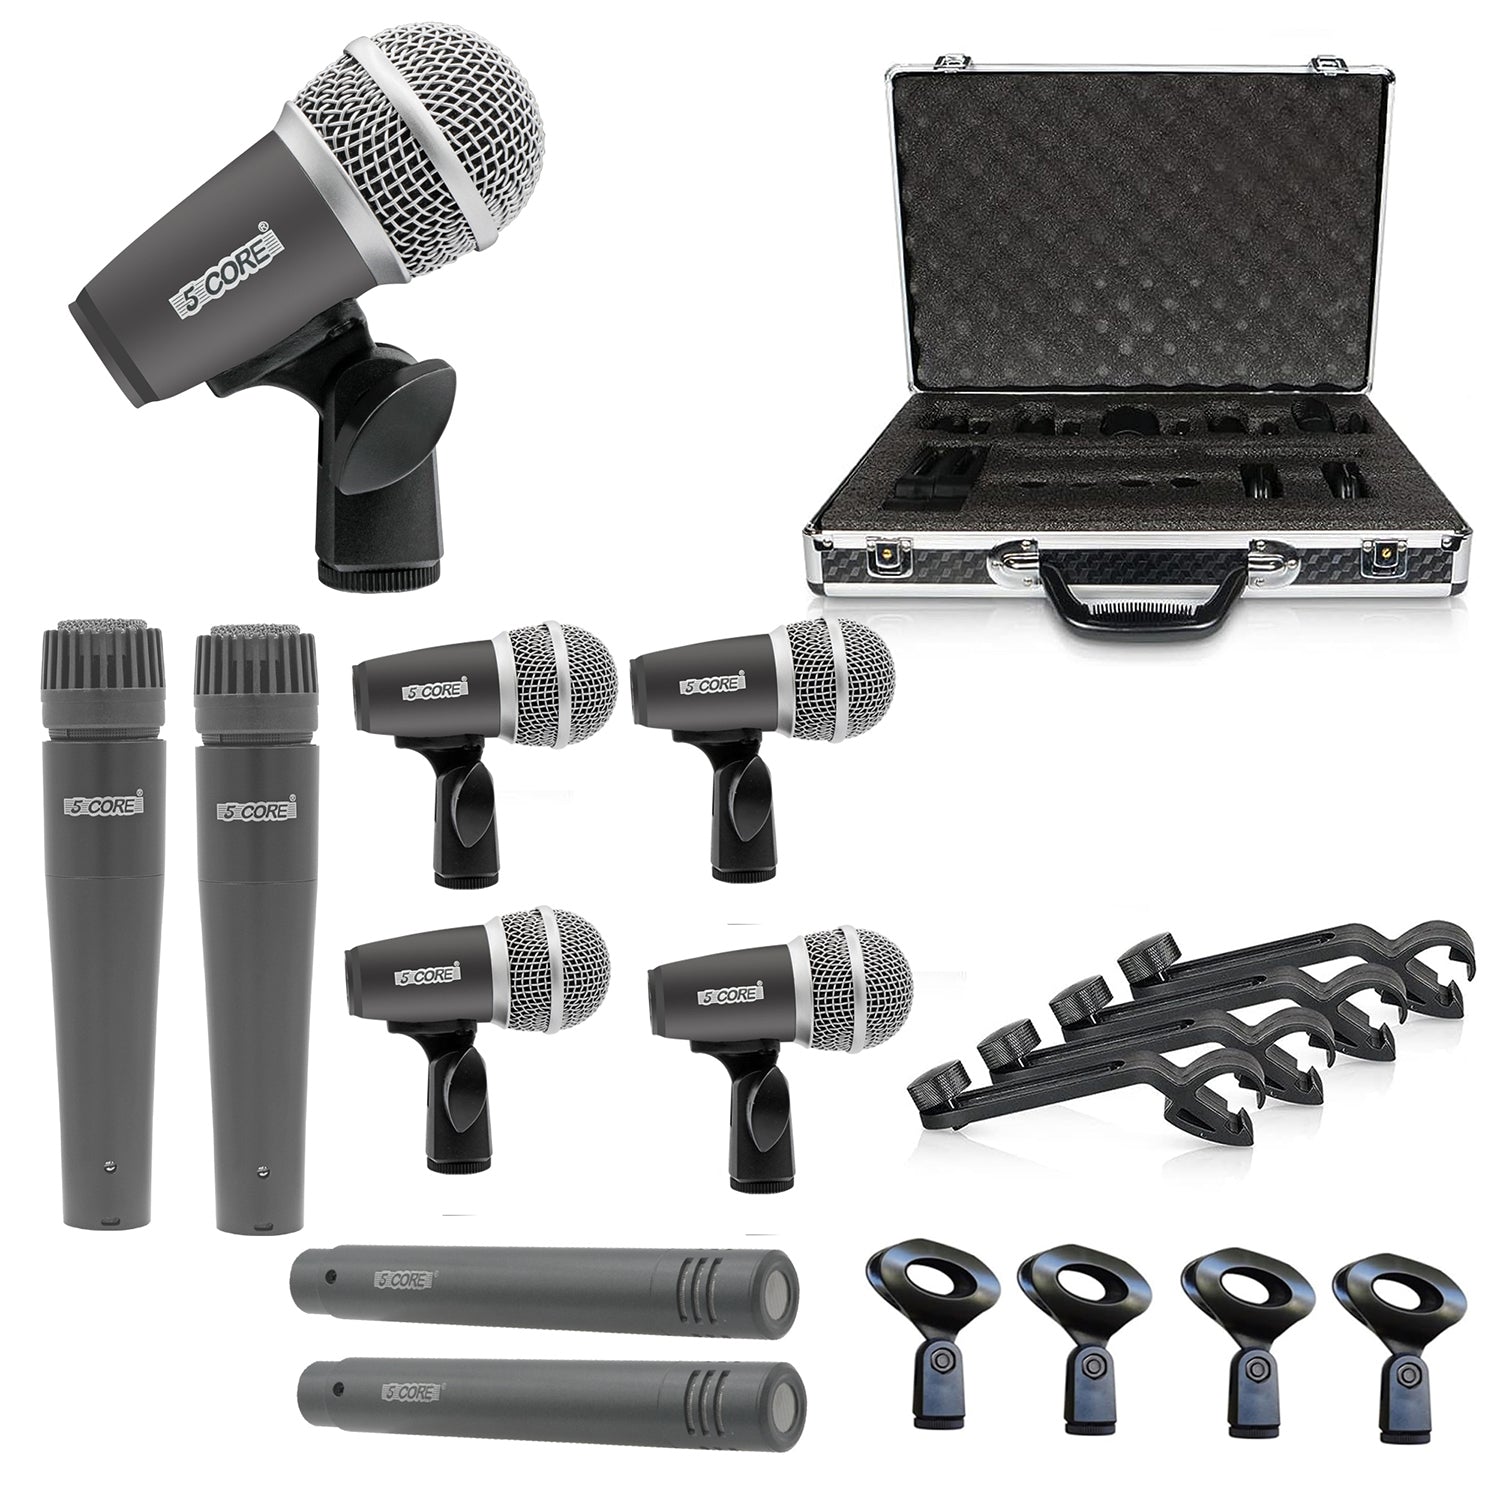 5 Core Drum Mic Kit 9 Piece Drumset Wired Dynamic Microphone Kick Bass, Tom/Snare & Cymbals Set